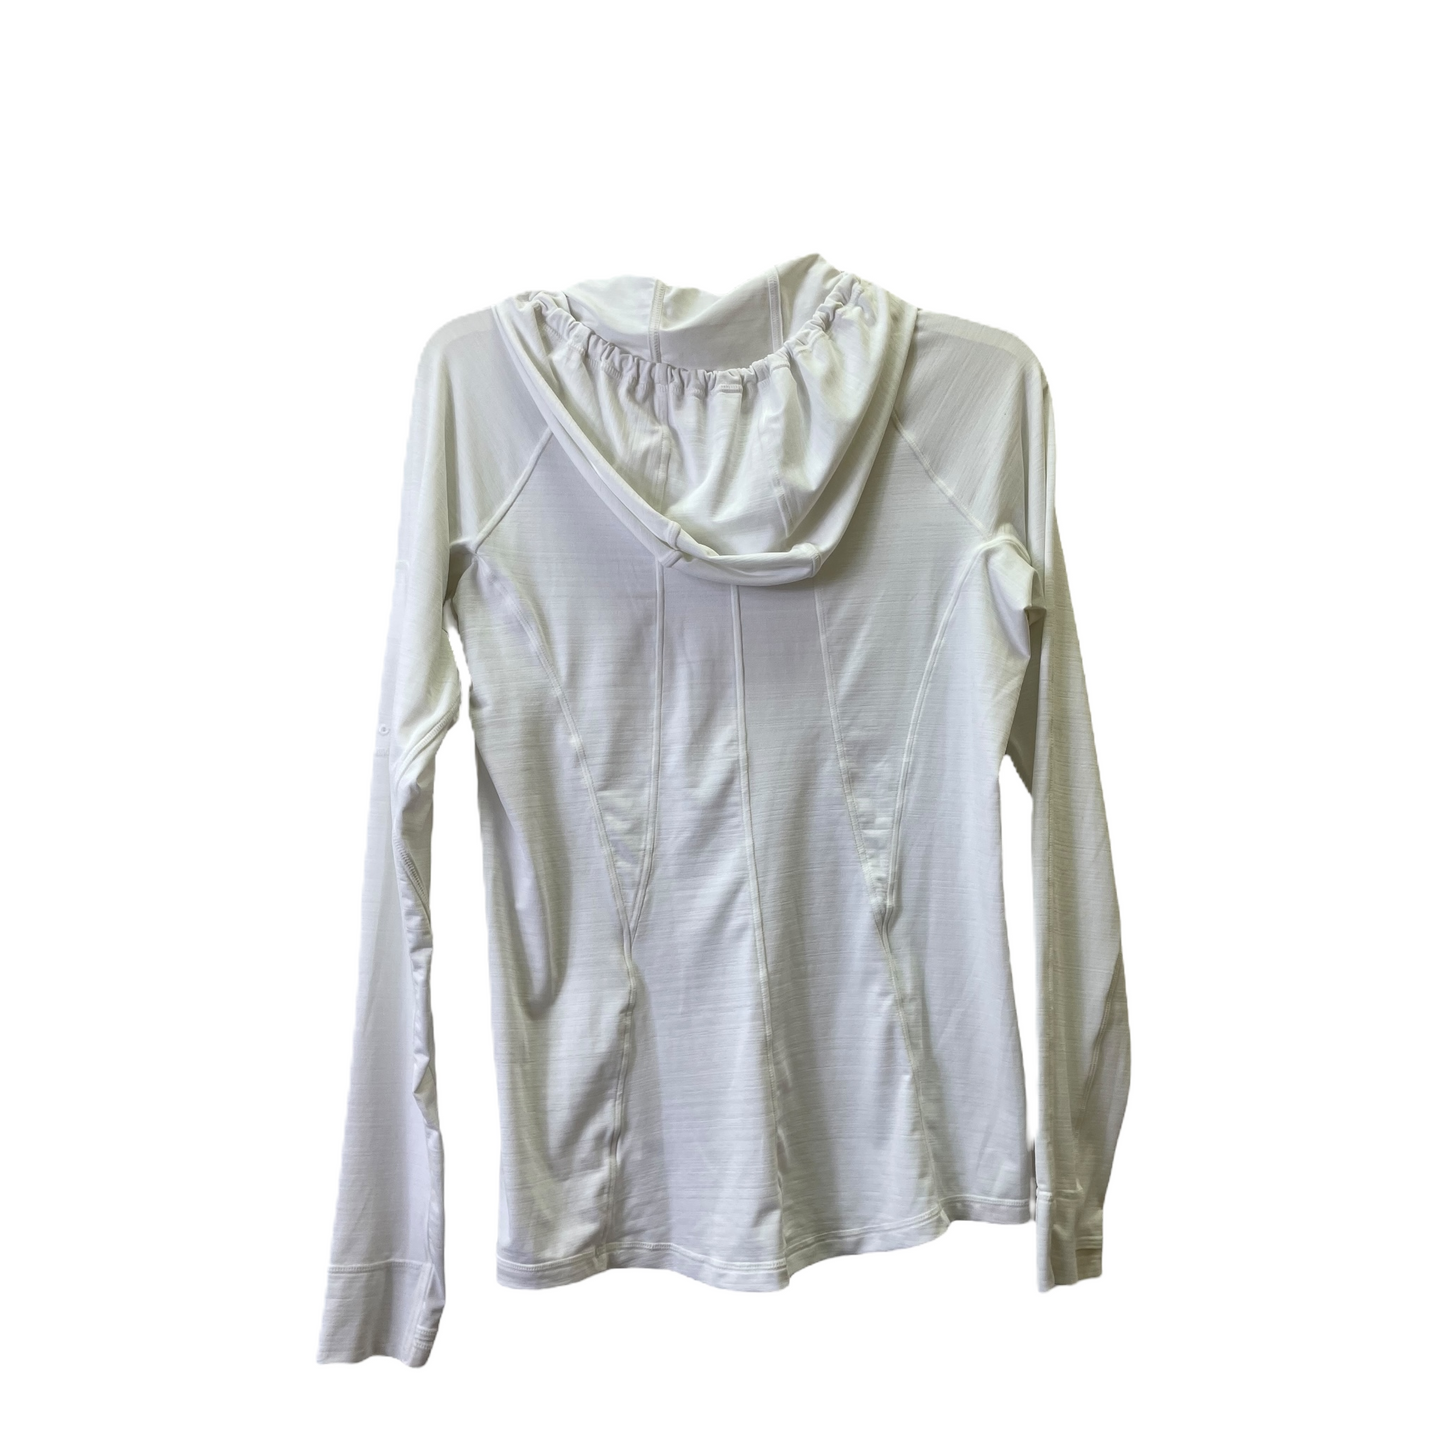 White Athletic Top Long Sleeve Collar By Athleta, Size: M